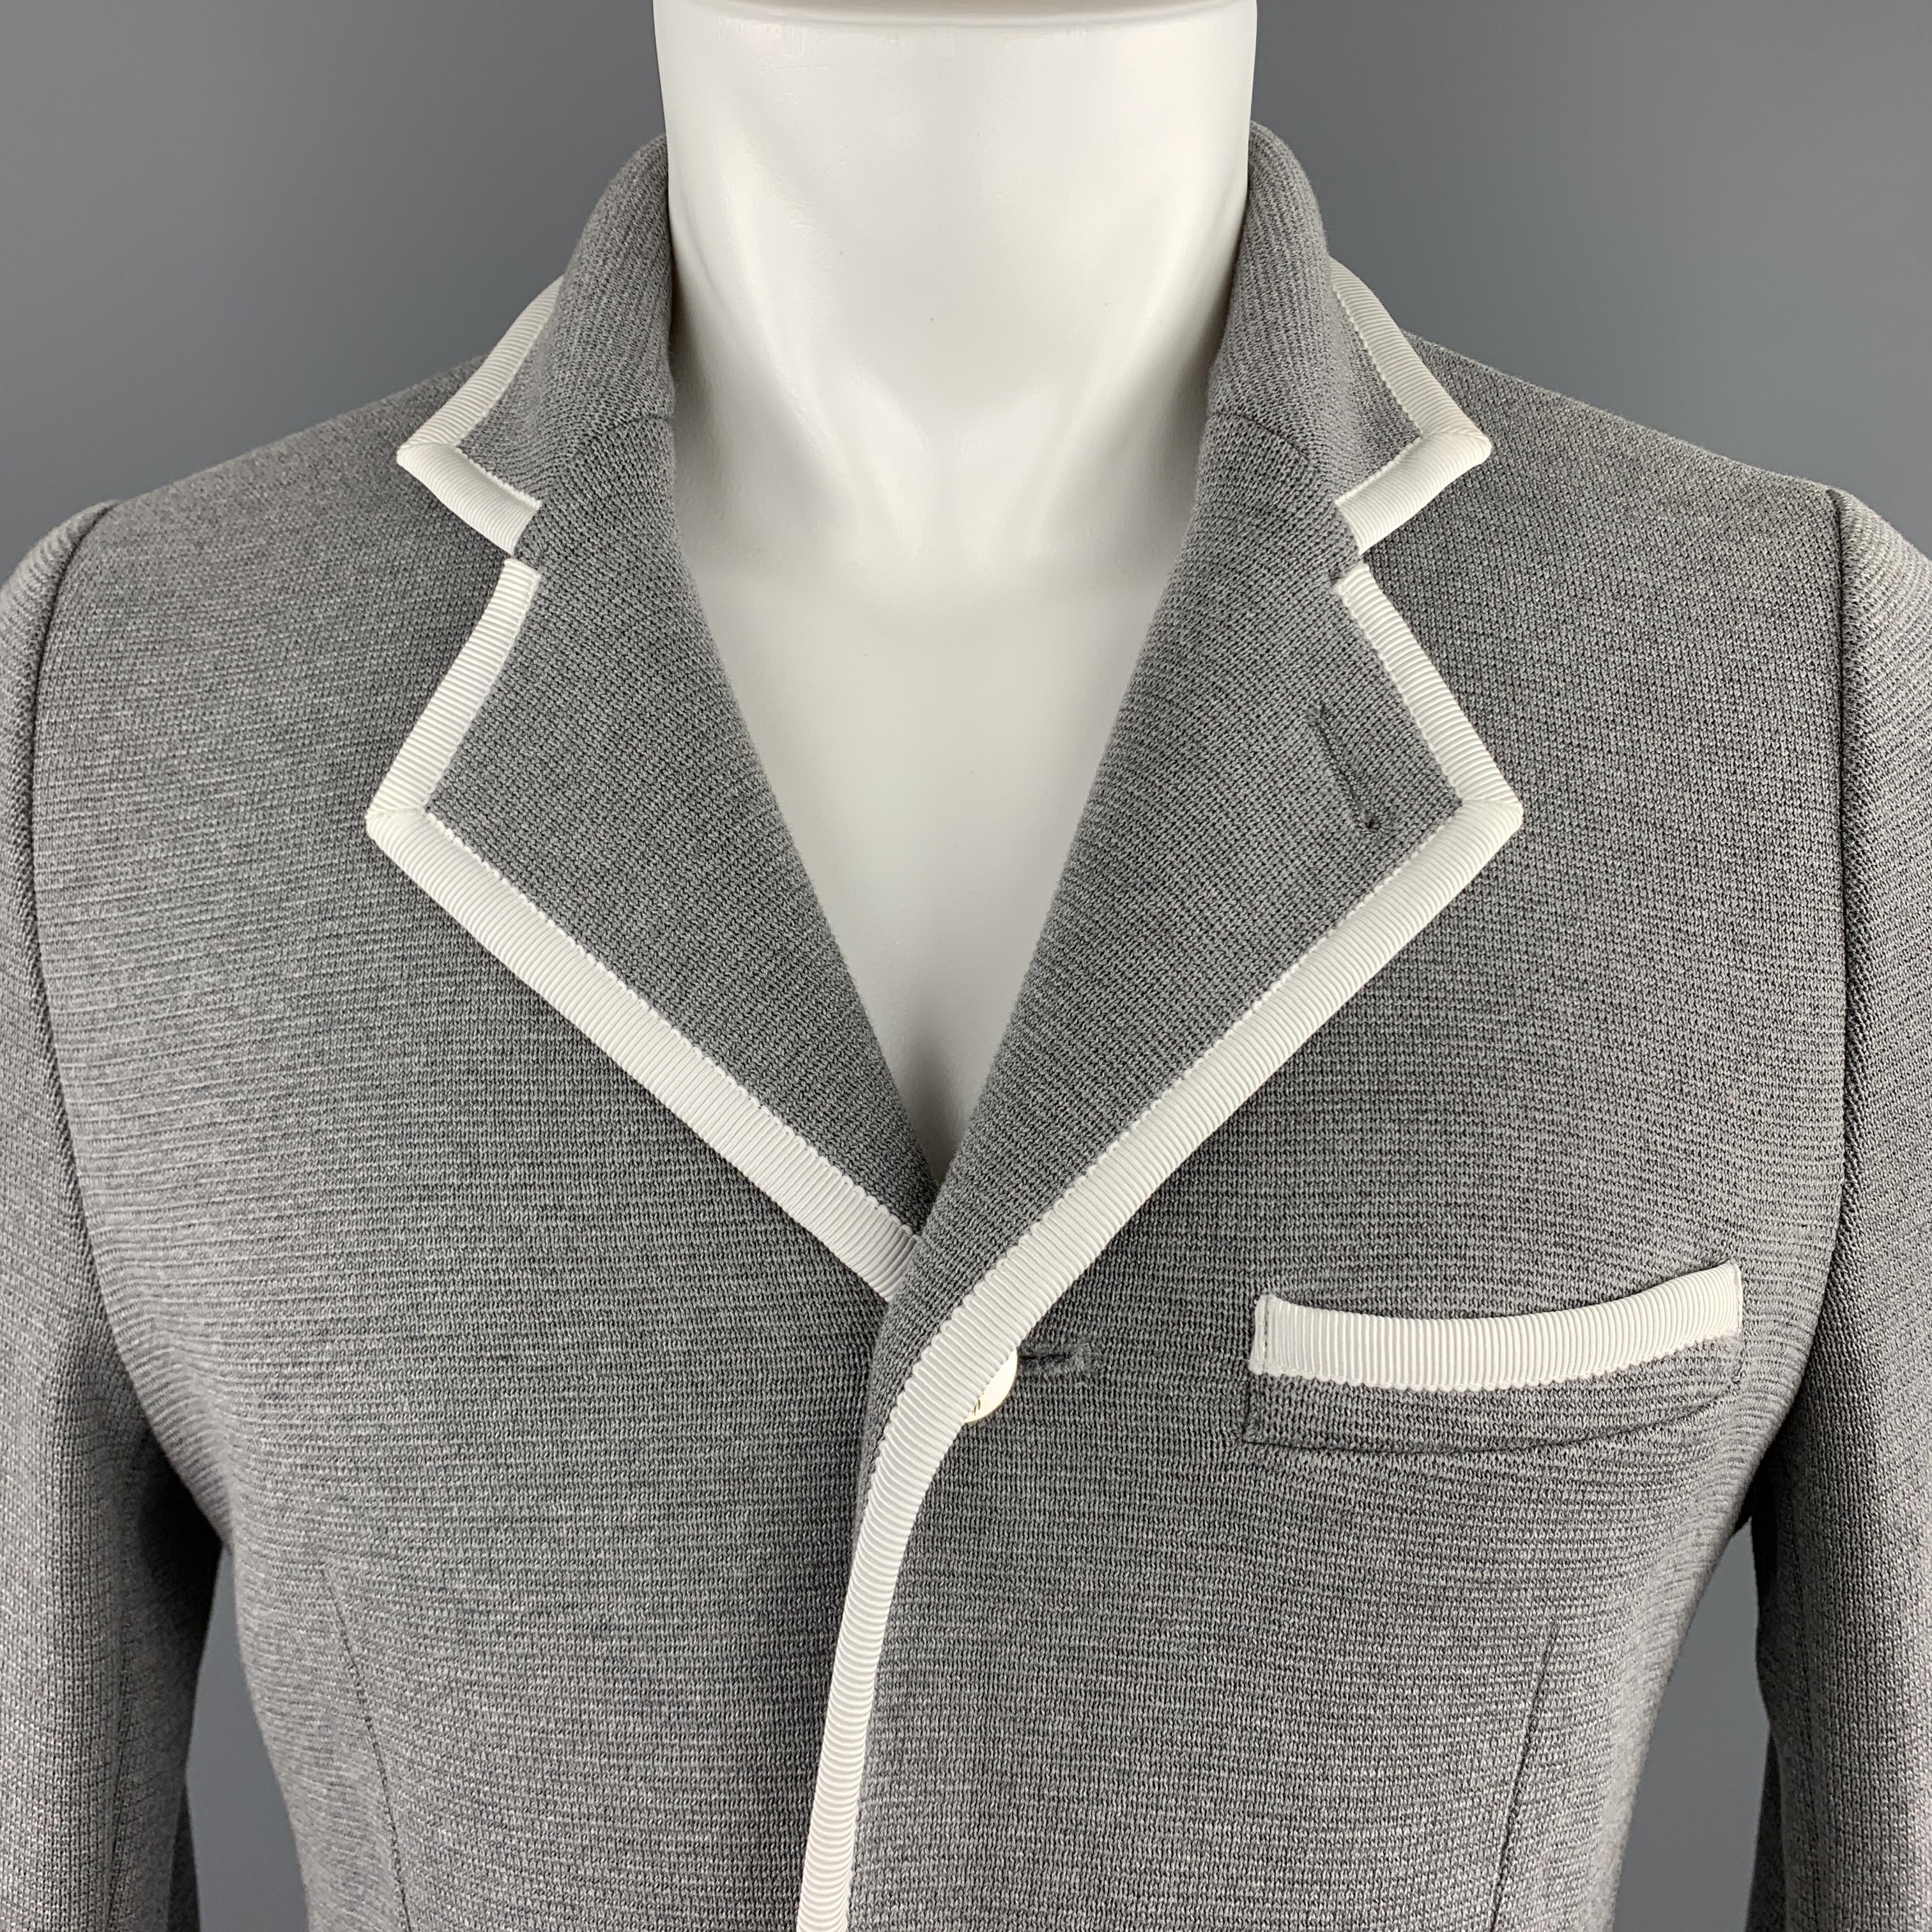 BLACK FLEECE sport coat comes in grey cotton knit with a notch lapel, single breasted, three silver tone metal button front, and cream faille contrast piping throughout. Label removed. As is. 

Excellent Pre-Owned Condition.
Marked: (no